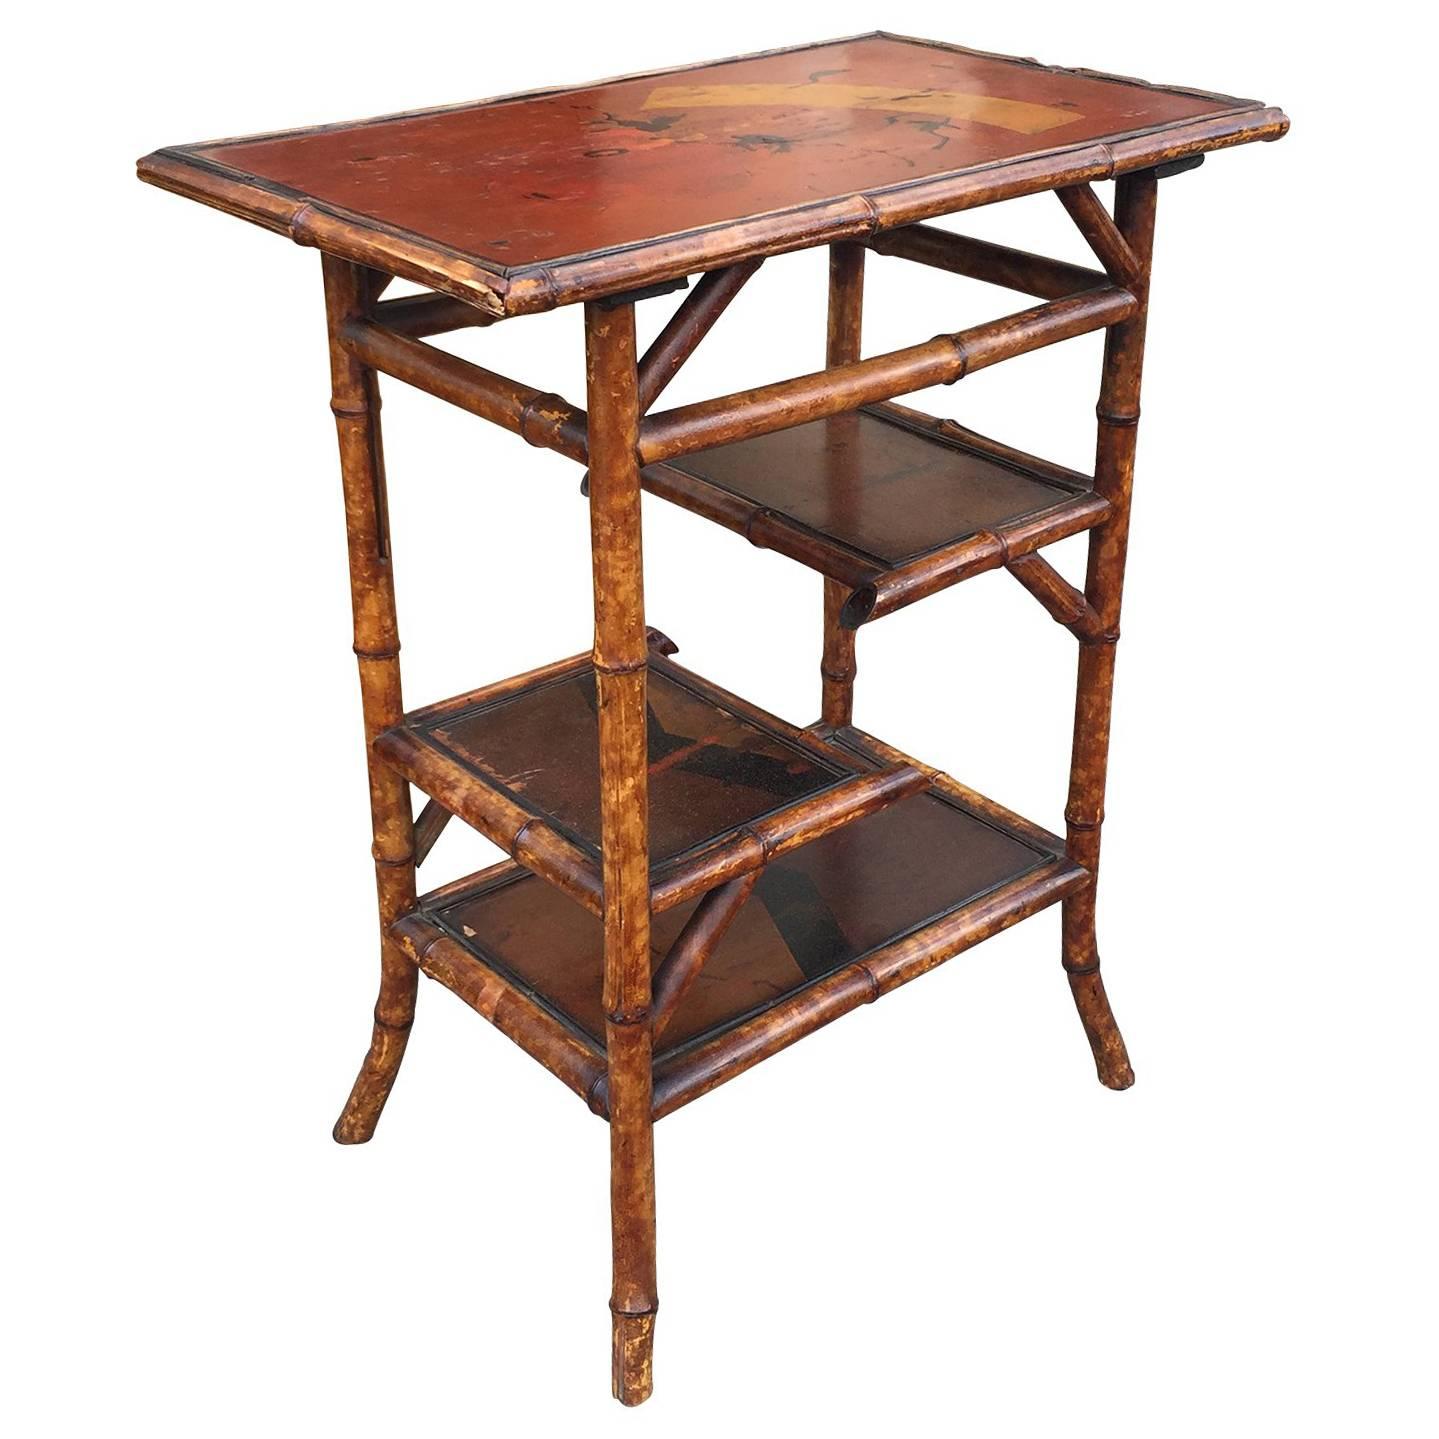 Small Chinese Bamboo Side Table with Painted Shelves, circa 1900